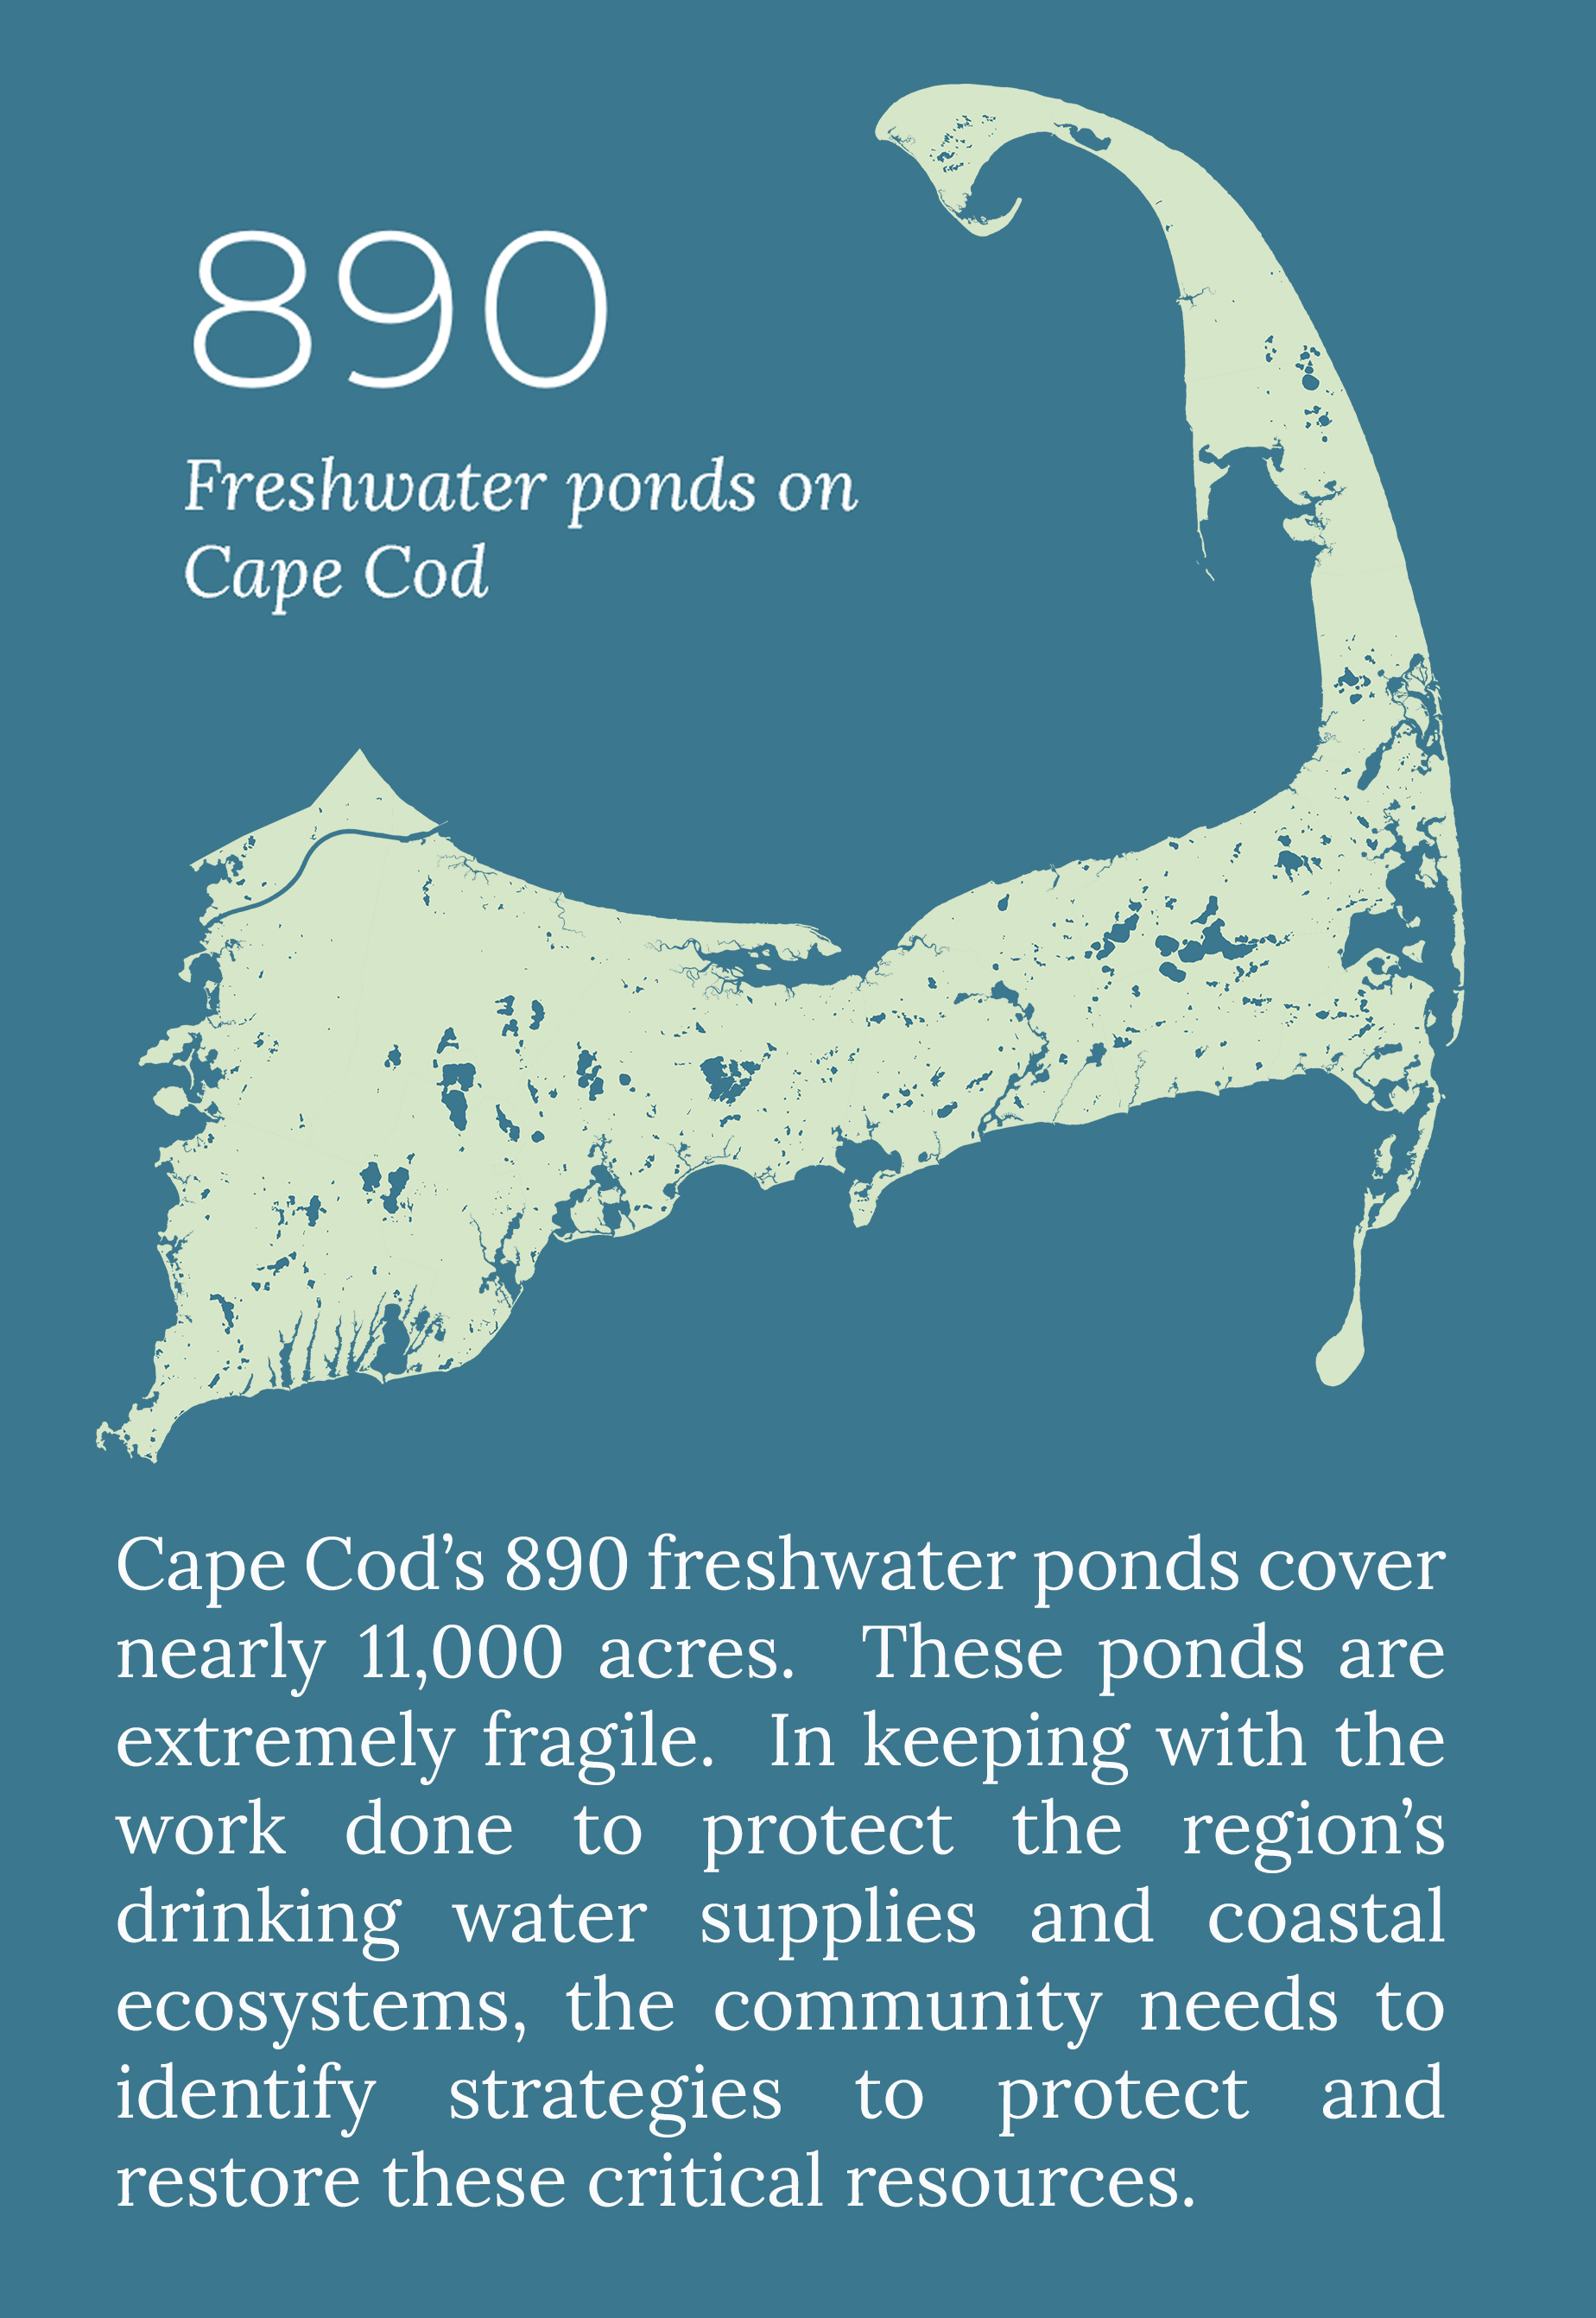 Cape Cod's 890 ponds cover nearly 11,000 acres. These ponds are extremely fragile. In keeping with the work done to protec the region's drinking water supplies and coastal ecosystems, the community needs to identify strategies to protect and restore these critical resources. 